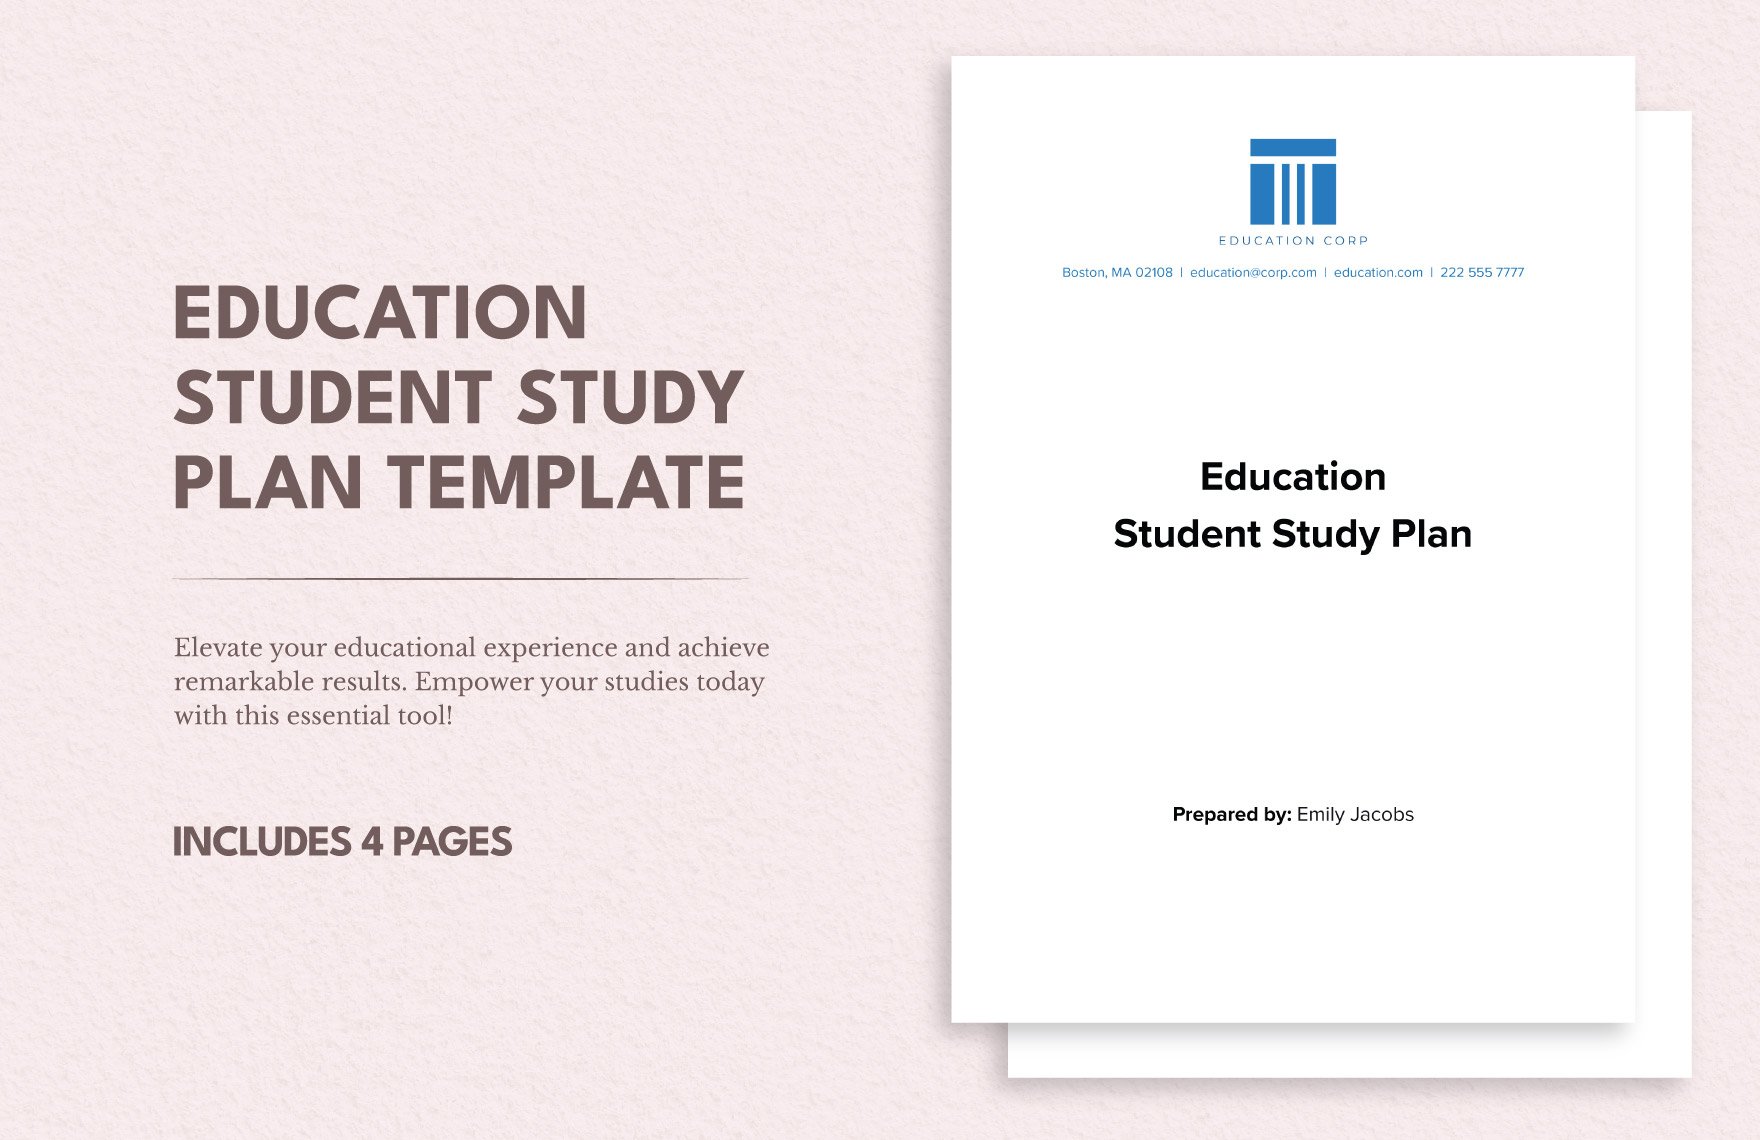 Education Student Study Plan Template in Word, Google Docs, PDF